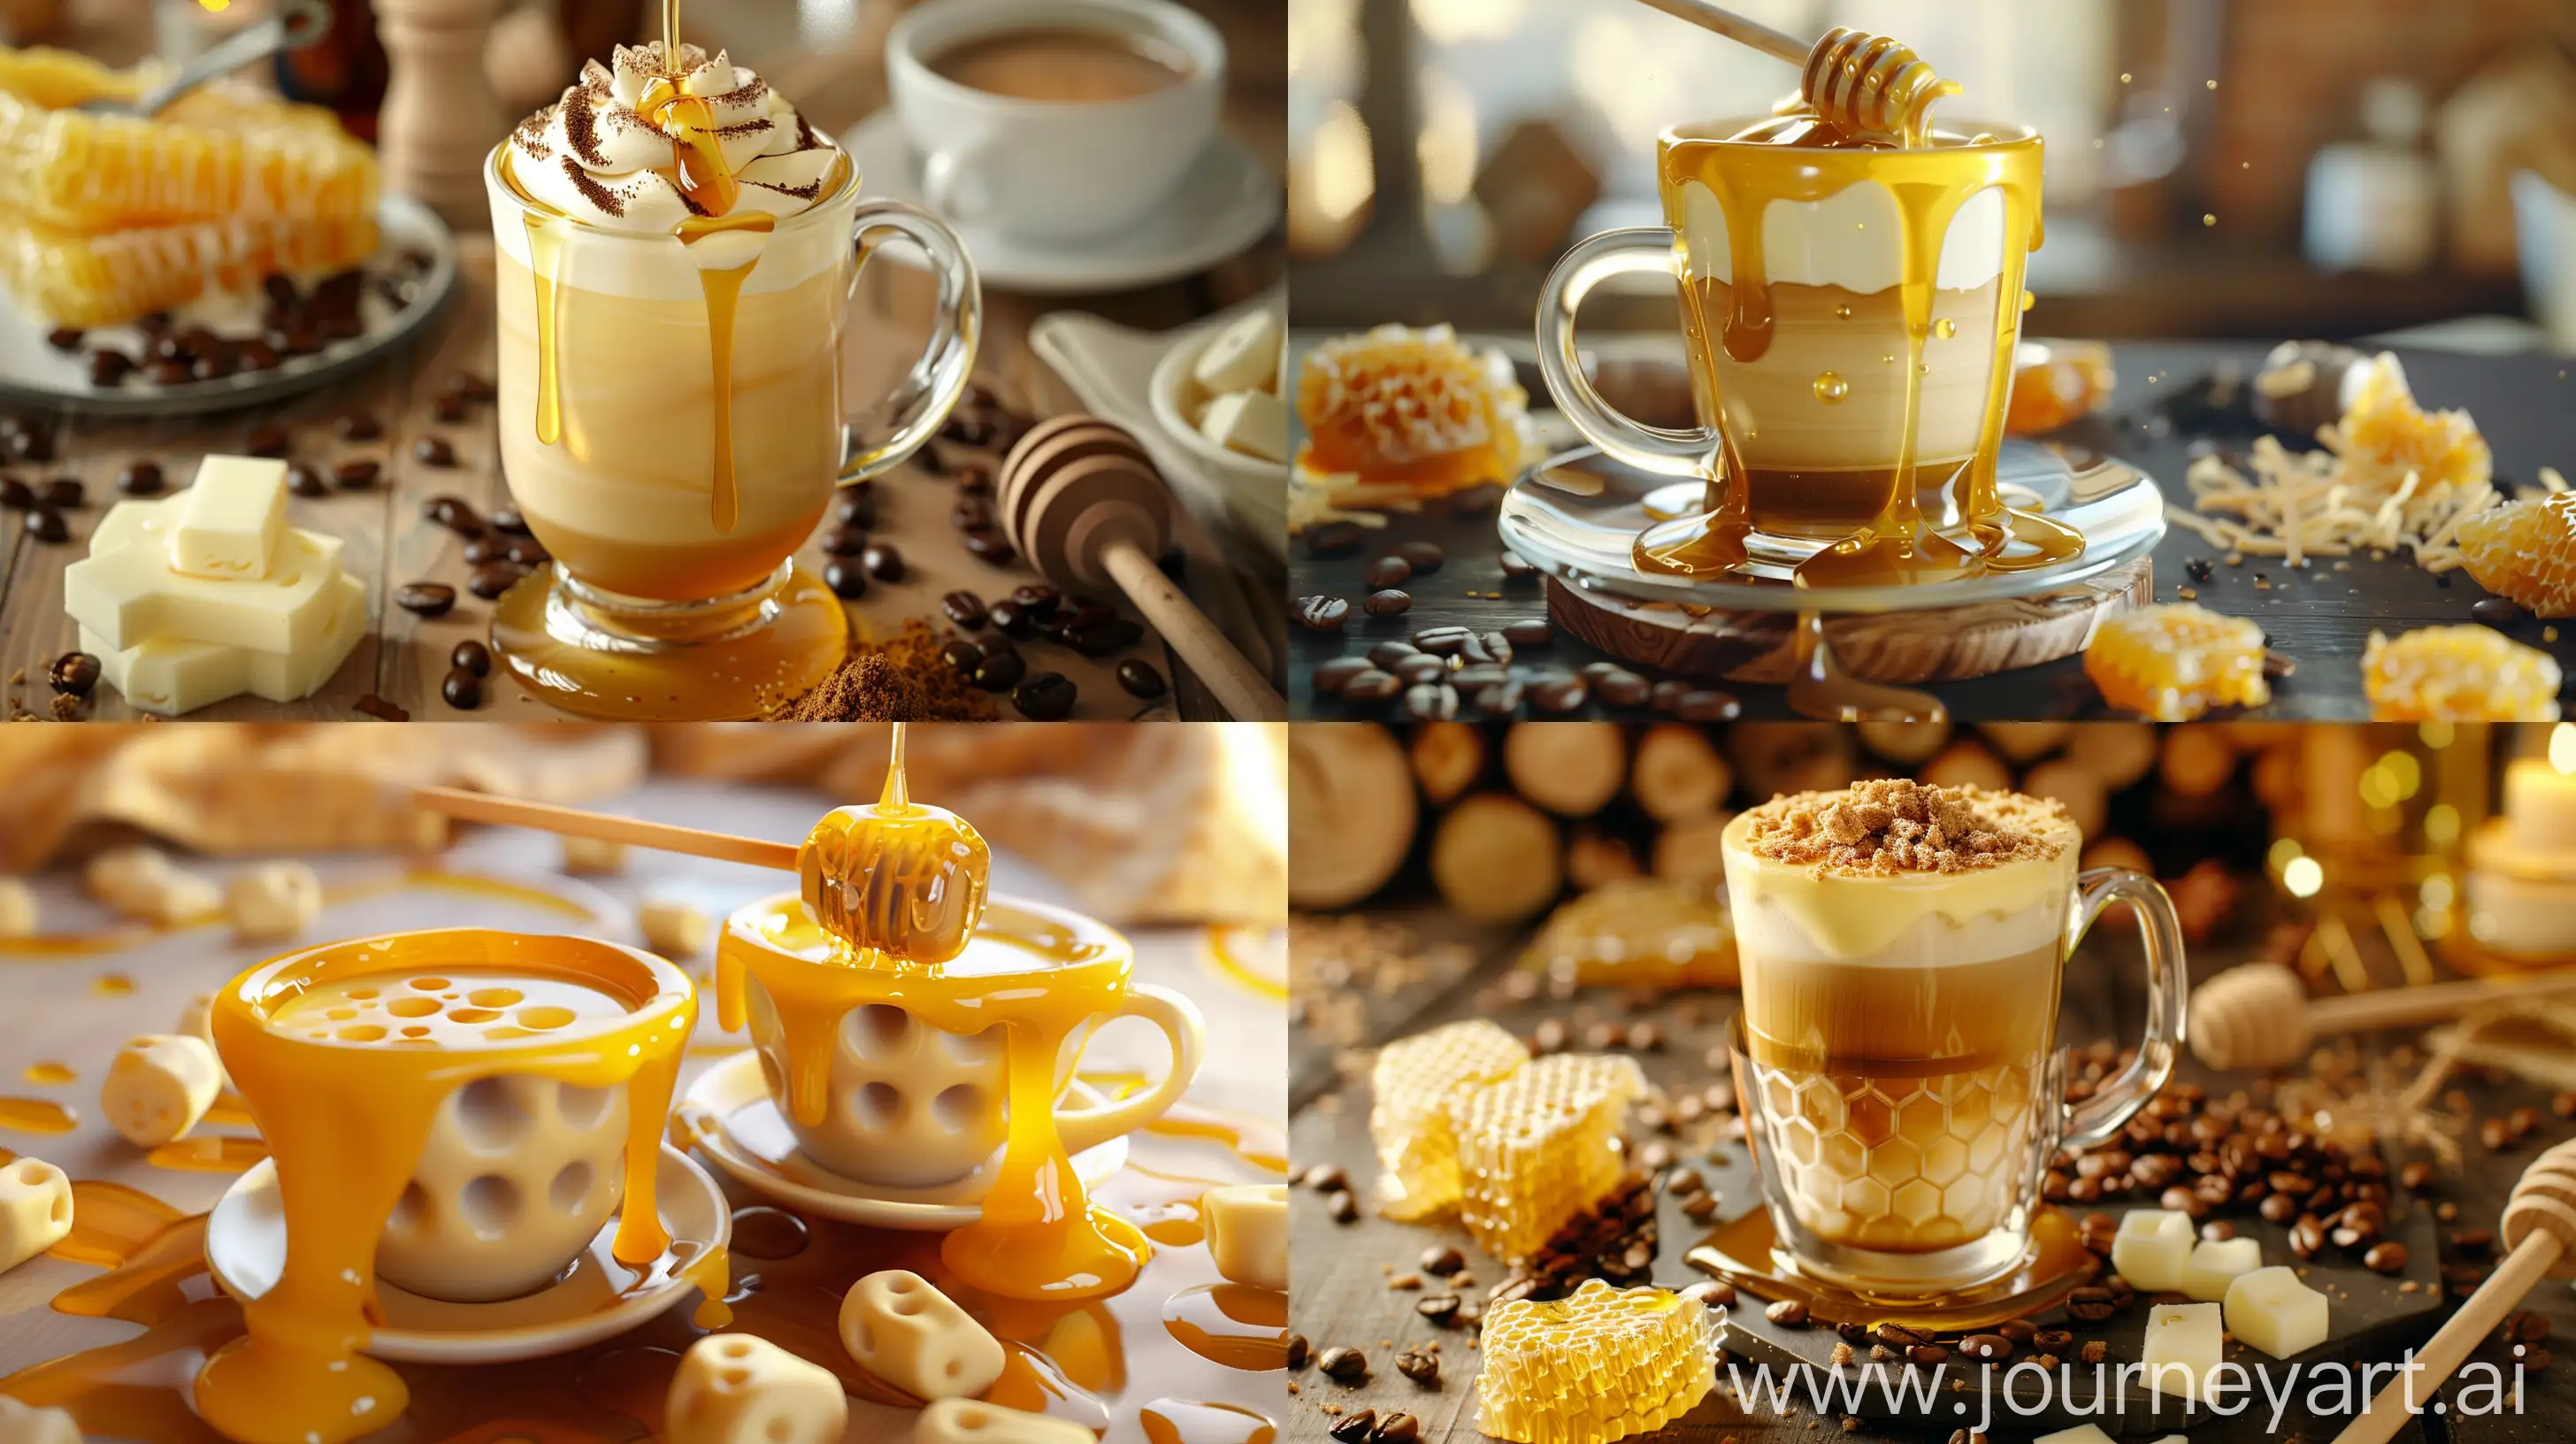 Irresistible-Honey-Cheese-Coffee-Delight-in-3D-Fantasy-Style